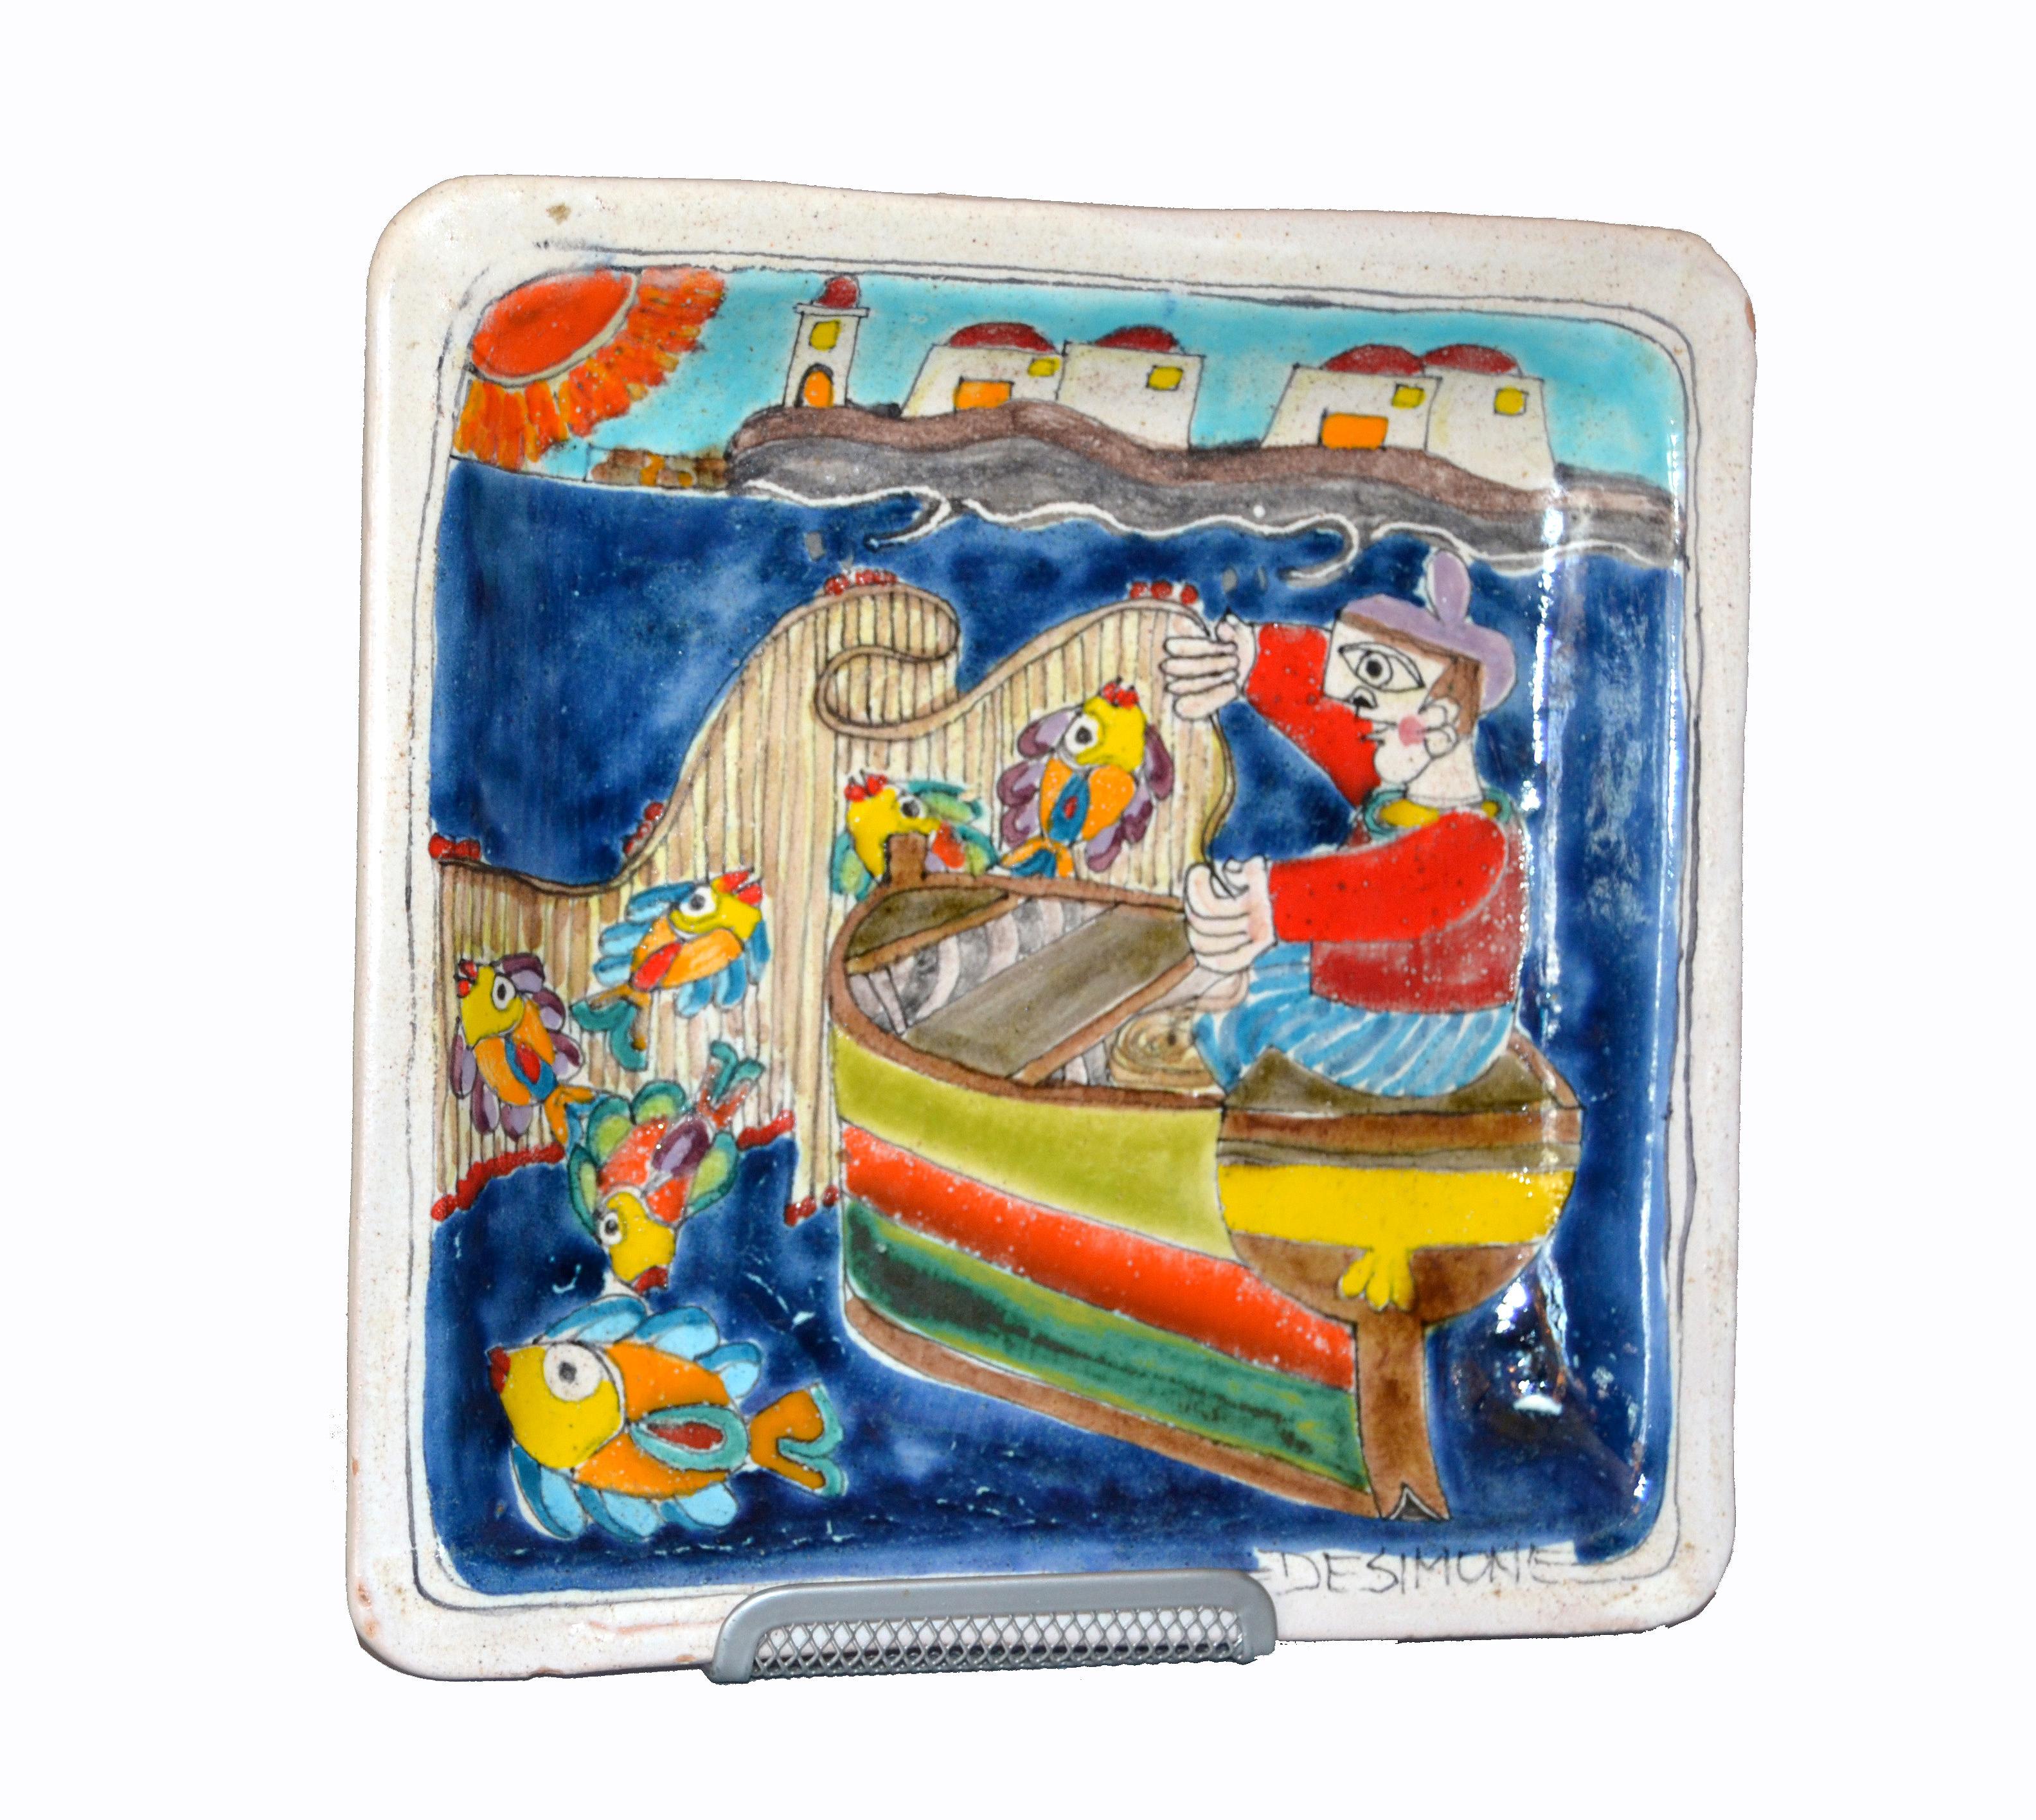 Original Italian Giovanni Desimone hand painted art pottery, square decor plate with a scene of a fisherman casting his net.
The plate is glazed and very colorful.
Makers Mark at the right corner as well as marked and numbered on underside,